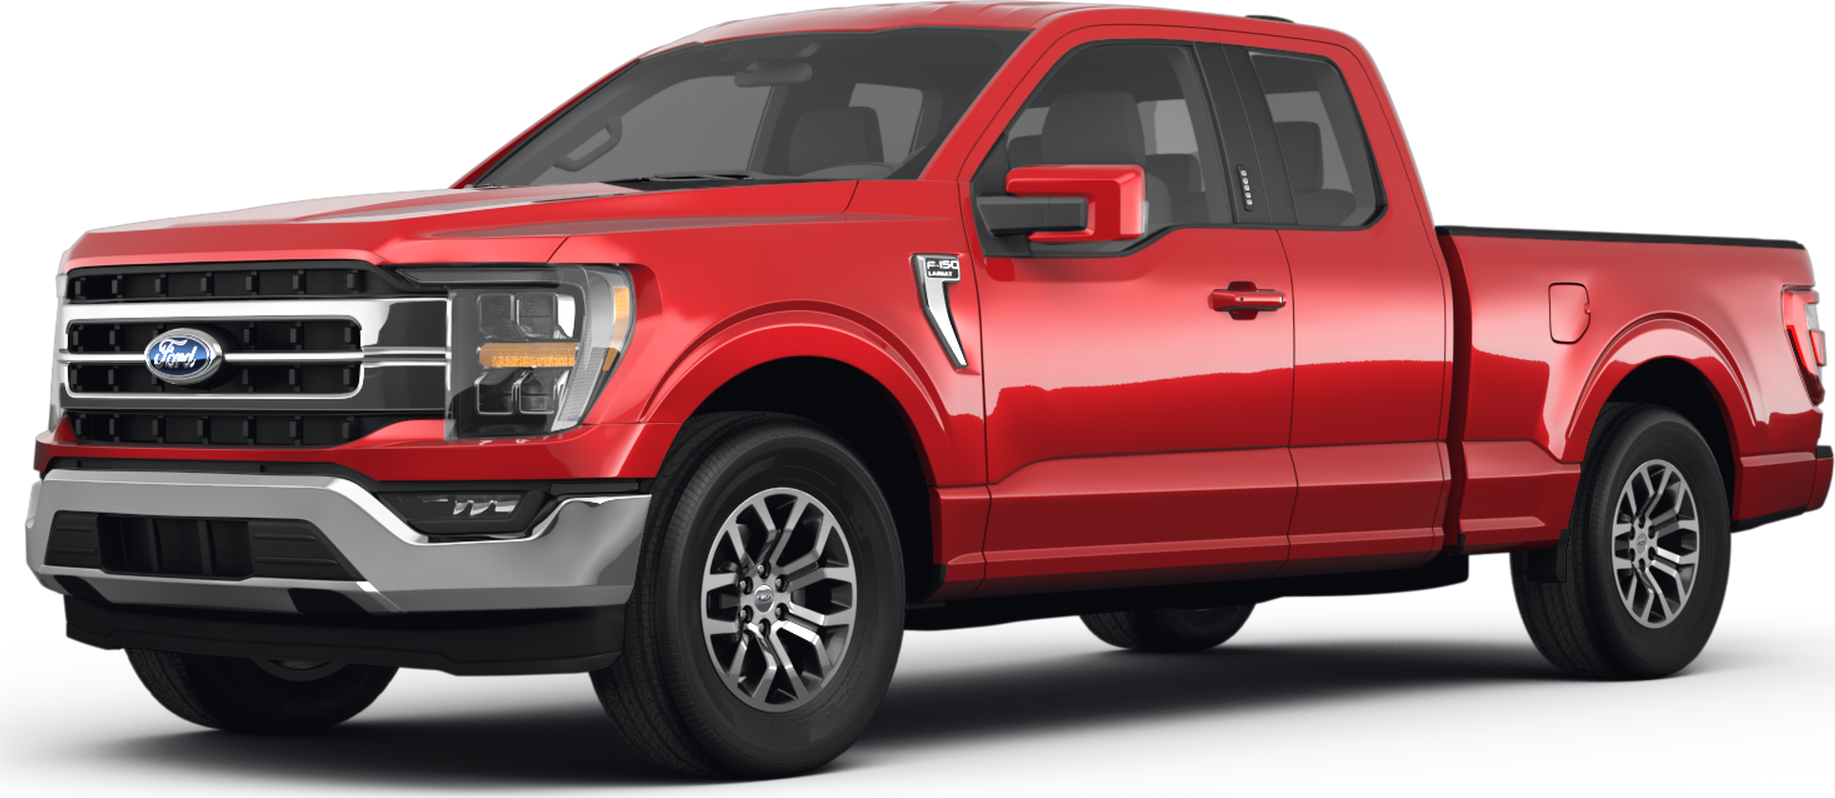 2022 Ford F150 Super Cab Price Reviews Pictures And More Kelley Blue Book